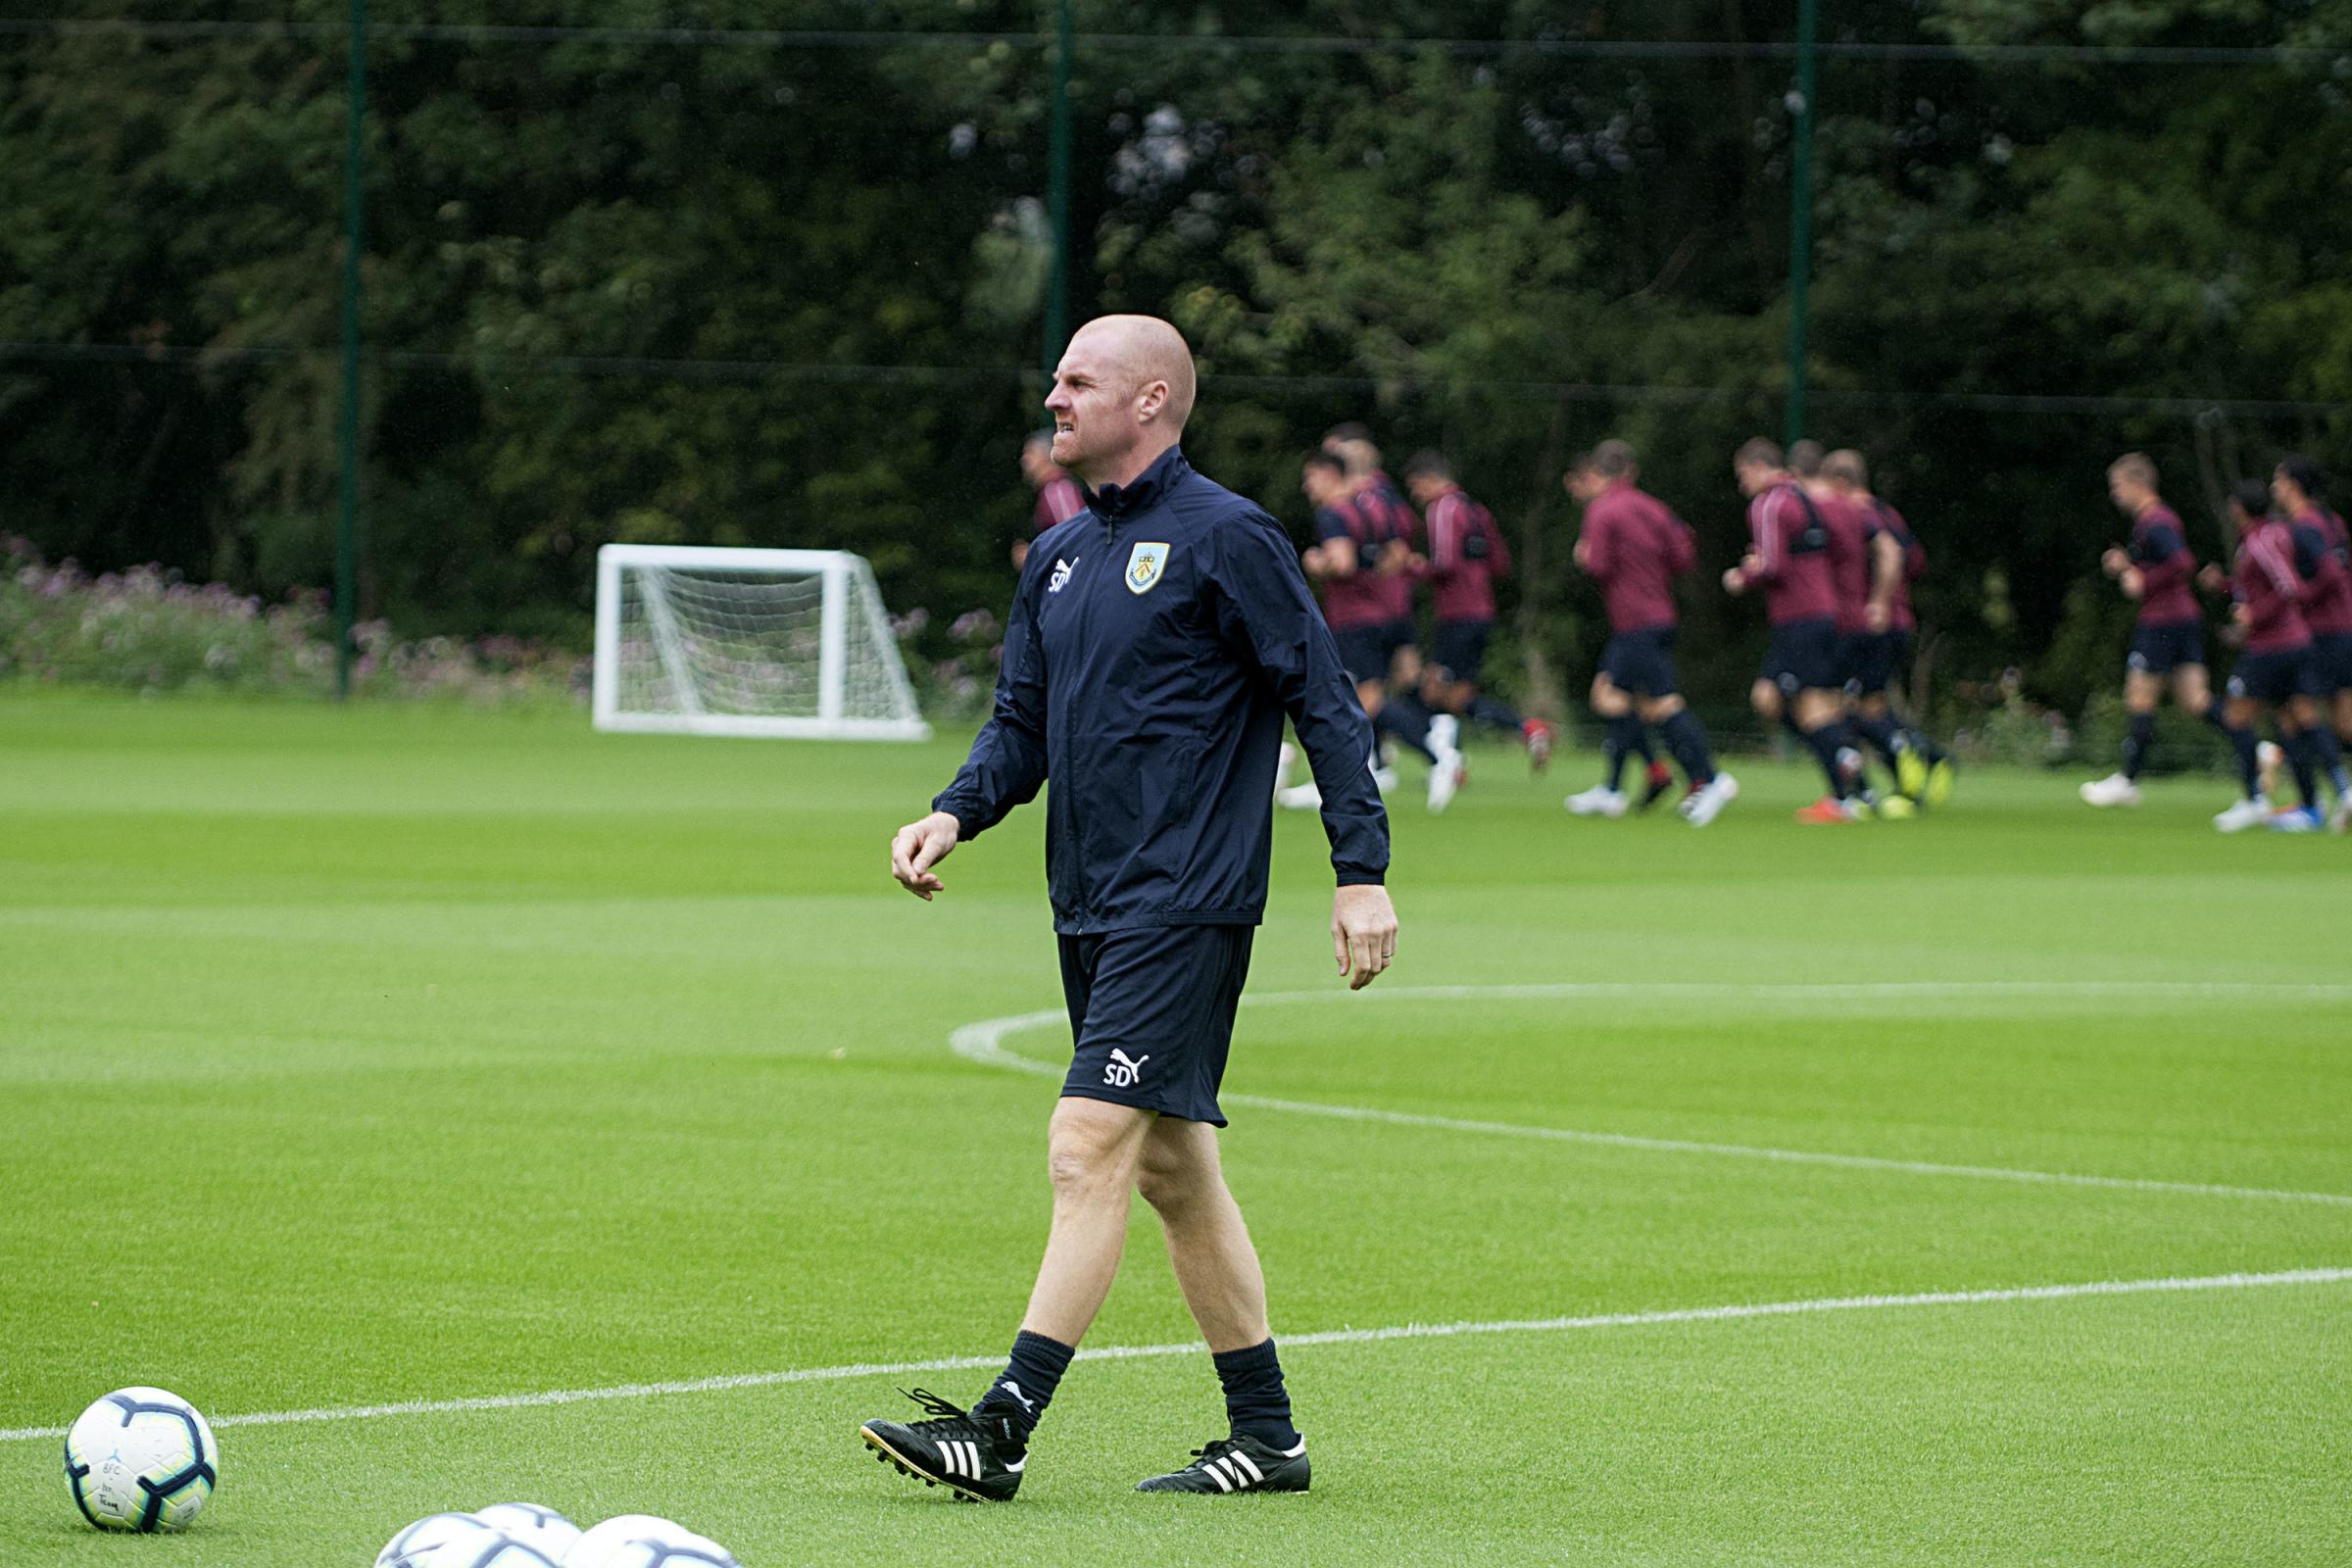 Burnley players staying at home amid coronavirus outbreak